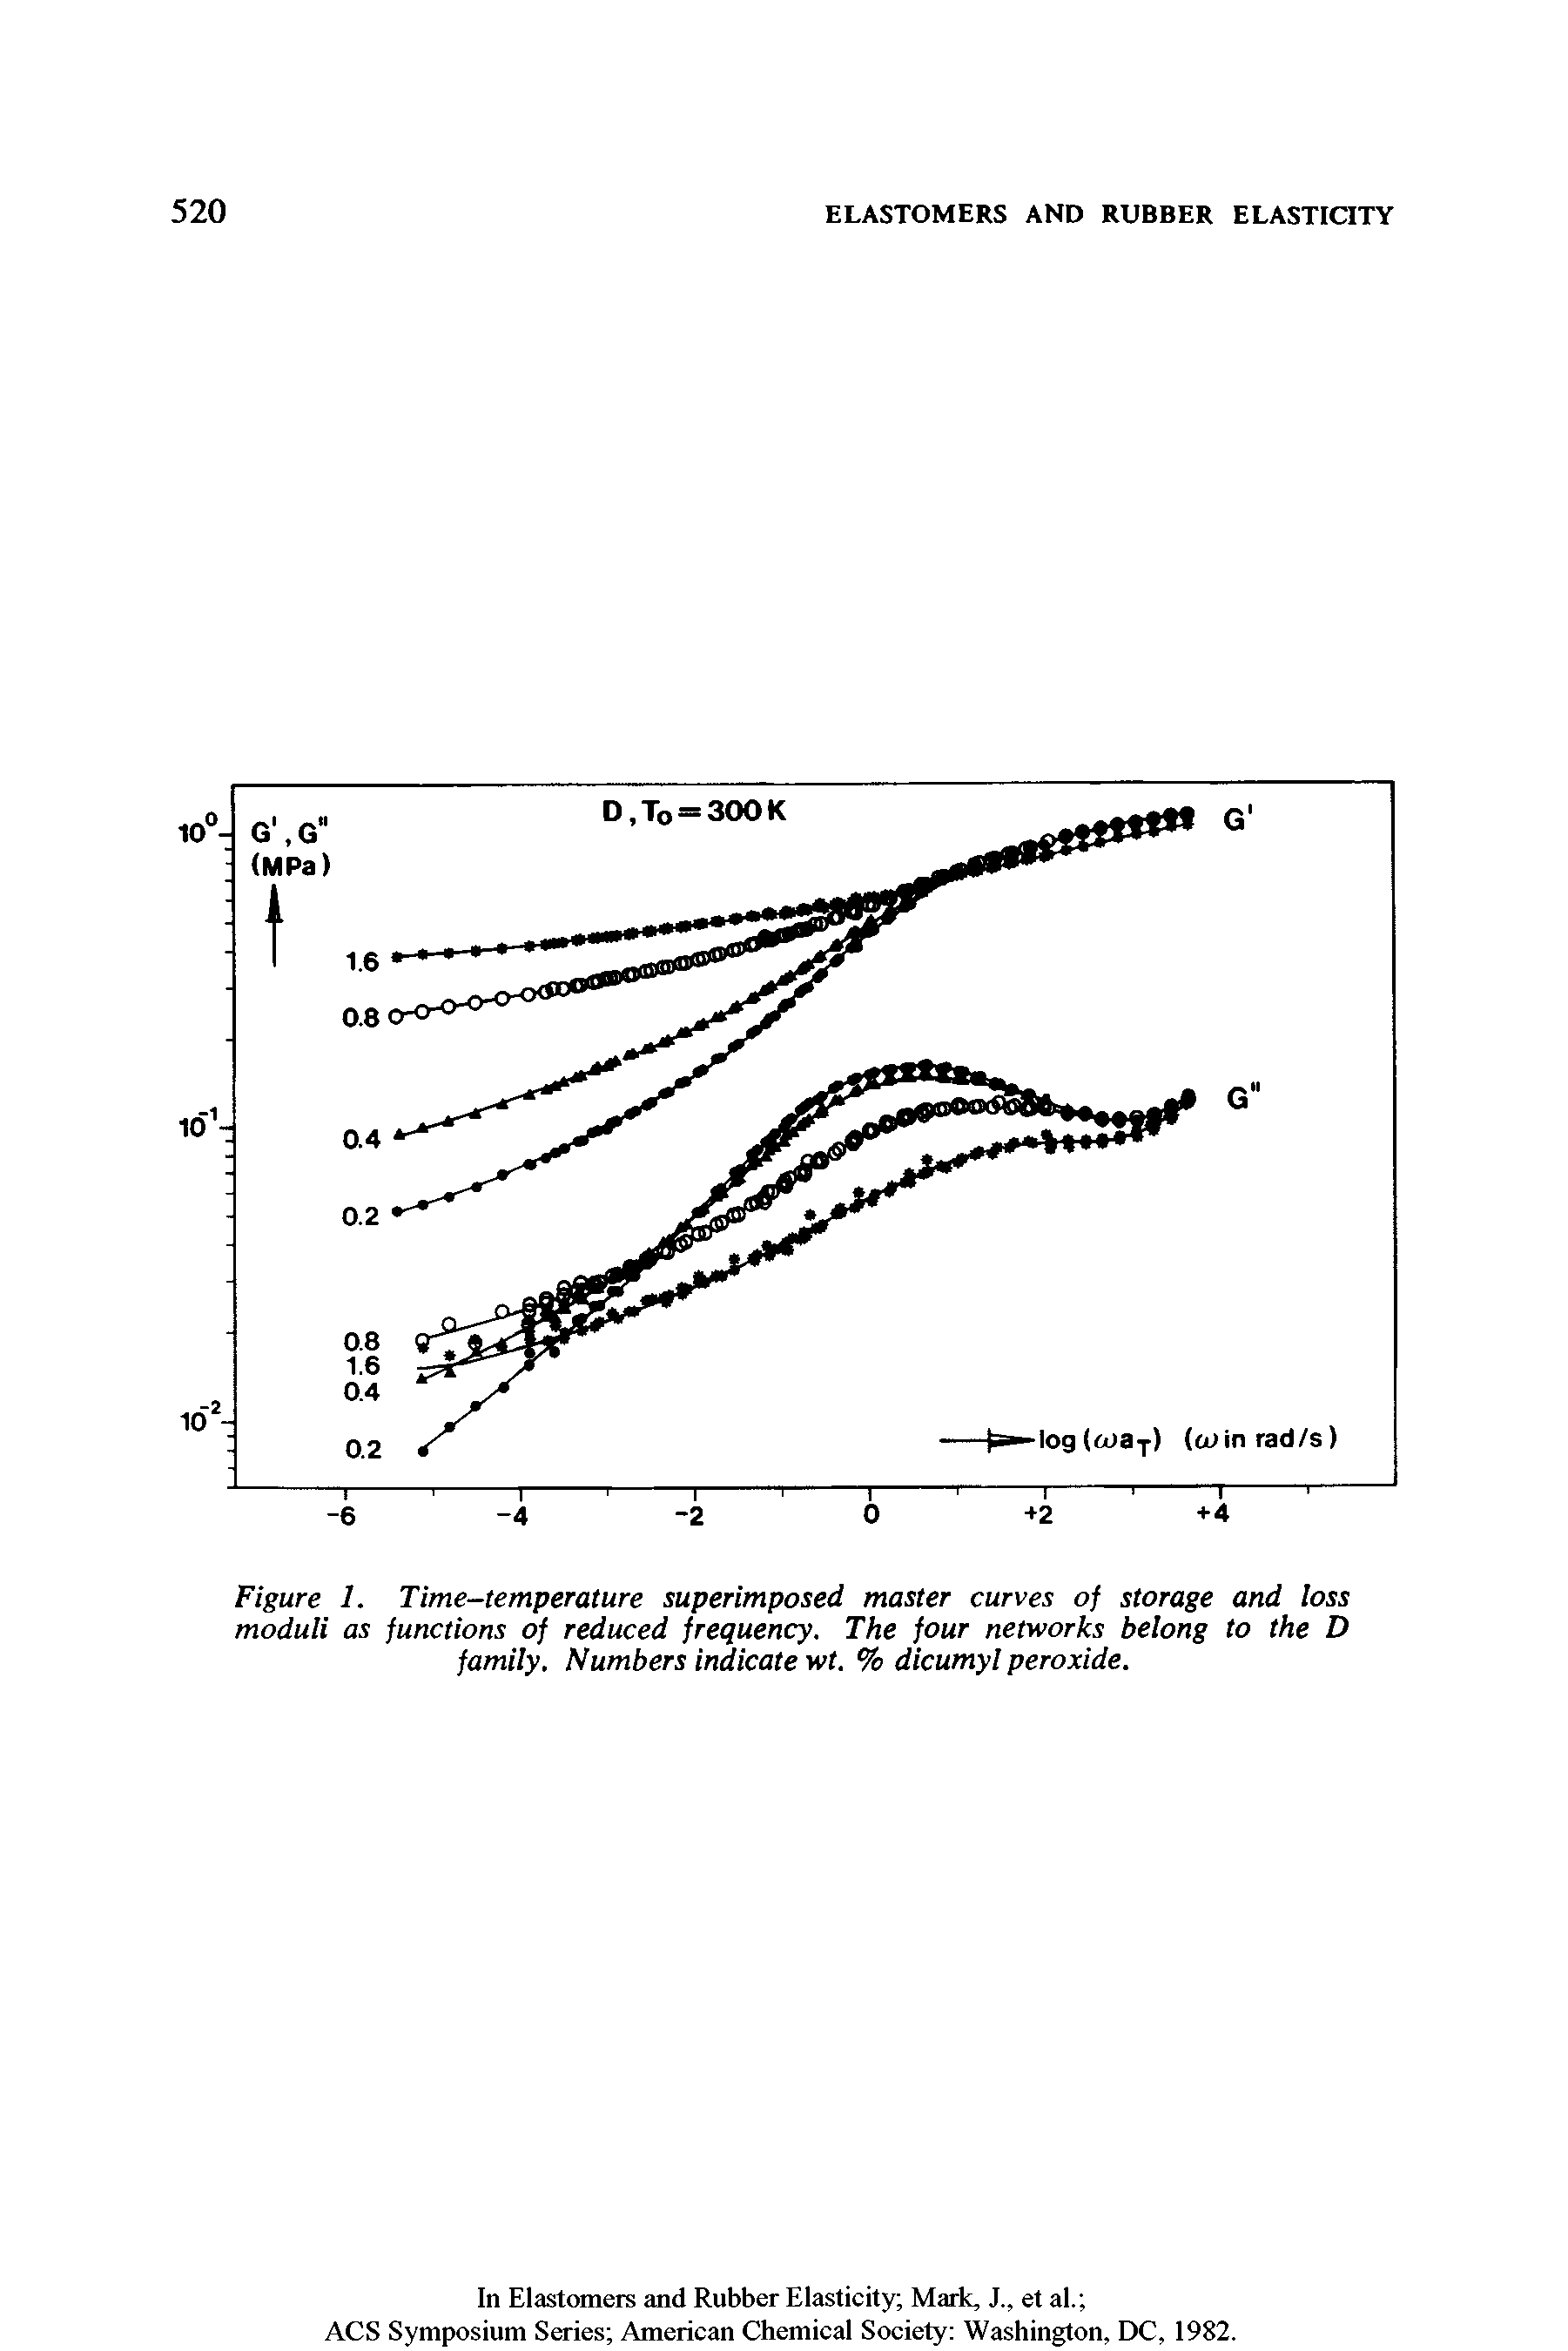 Figure 1. Time-temperature superimposed master curves of storage and loss moduli as functions of reduced frequency. The four networks belong to the D family. Numbers indicate wt. % dicumyl peroxide.